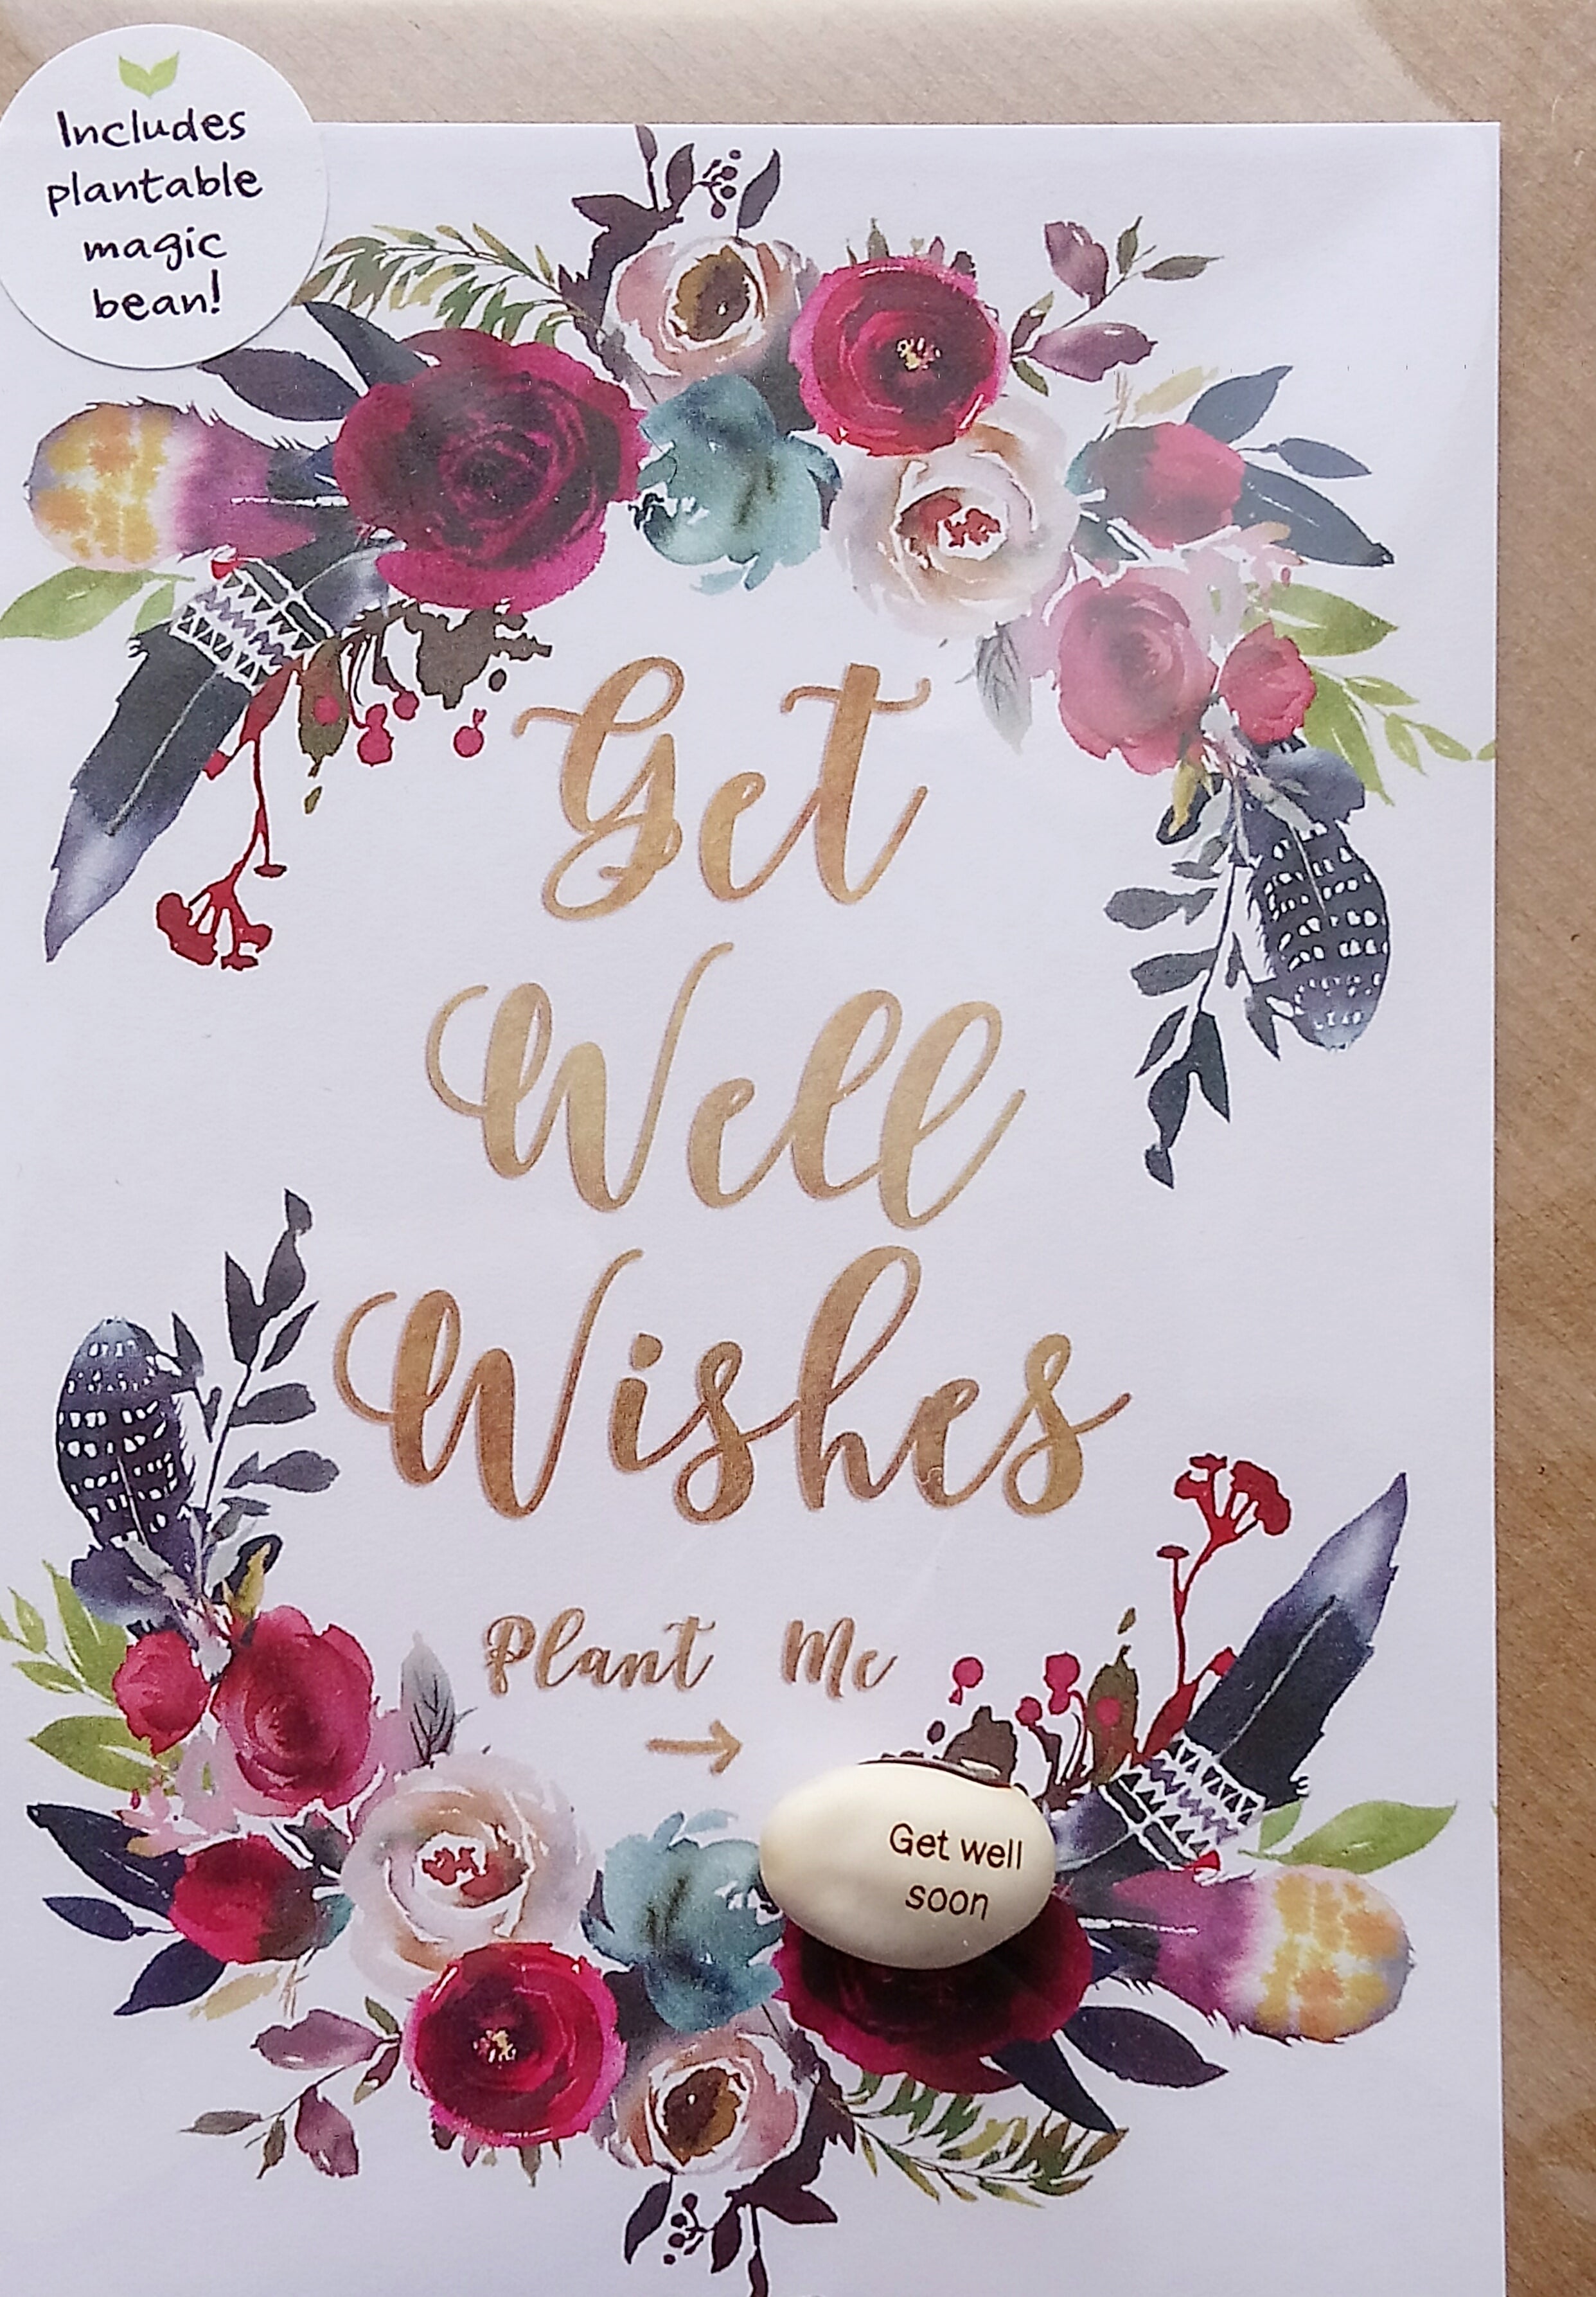 Magic Bean Get Well Card by Lucy and Lolly